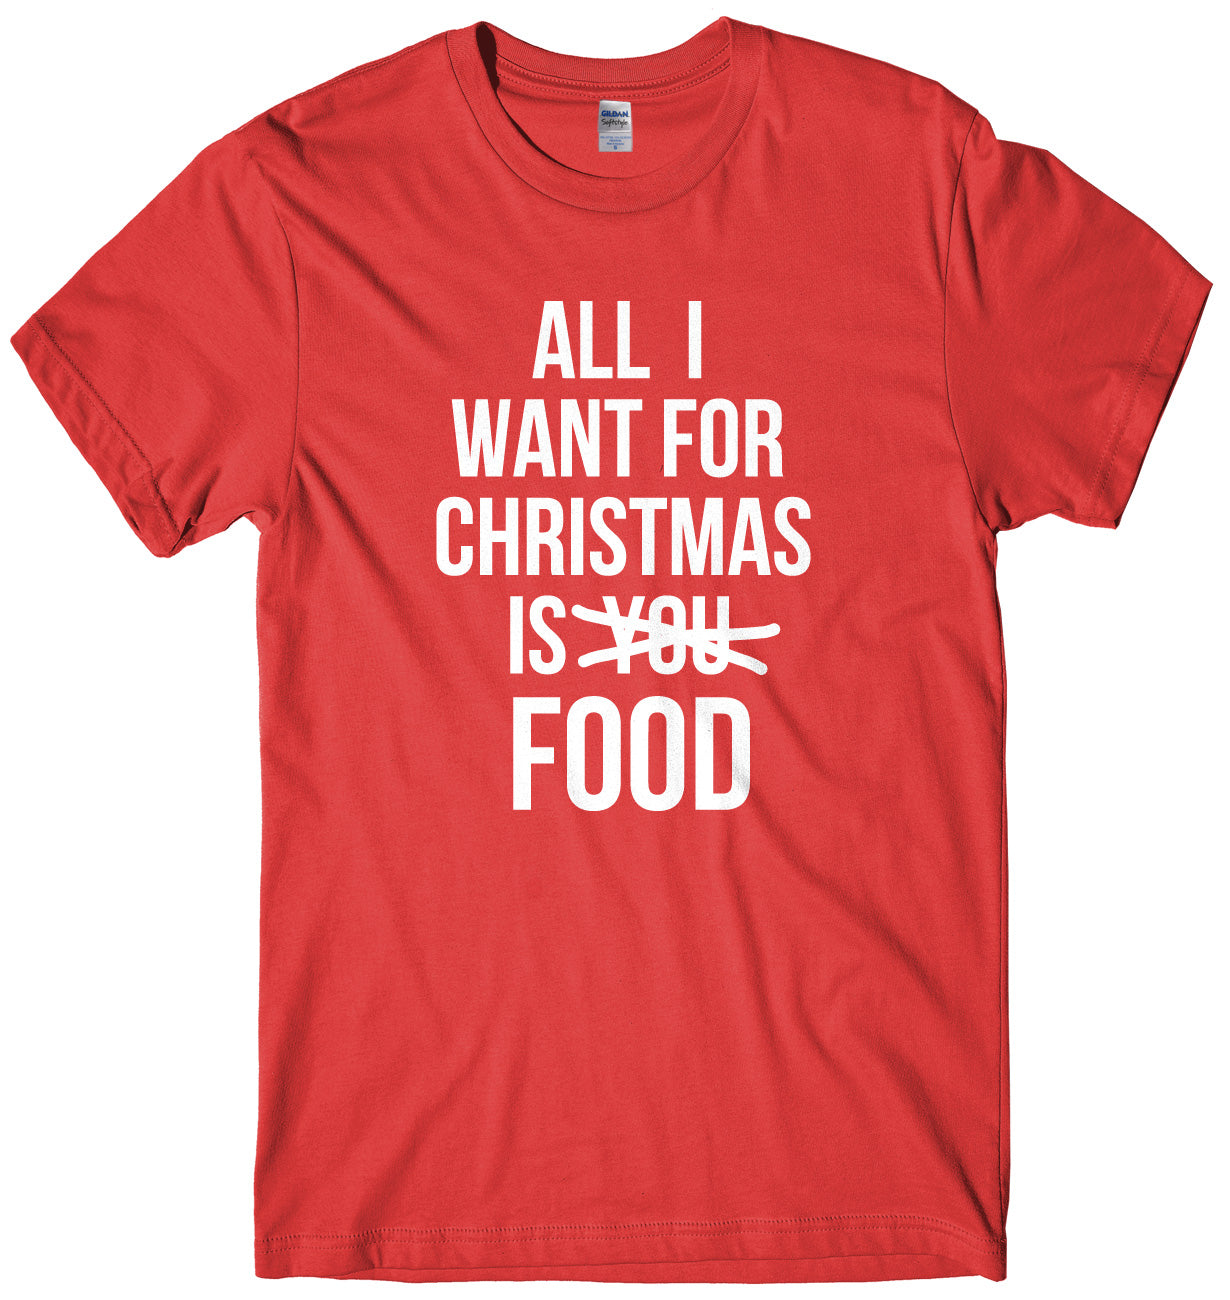 All I want For Christmas Is Food Mens Unisex Christmas T-Shirt